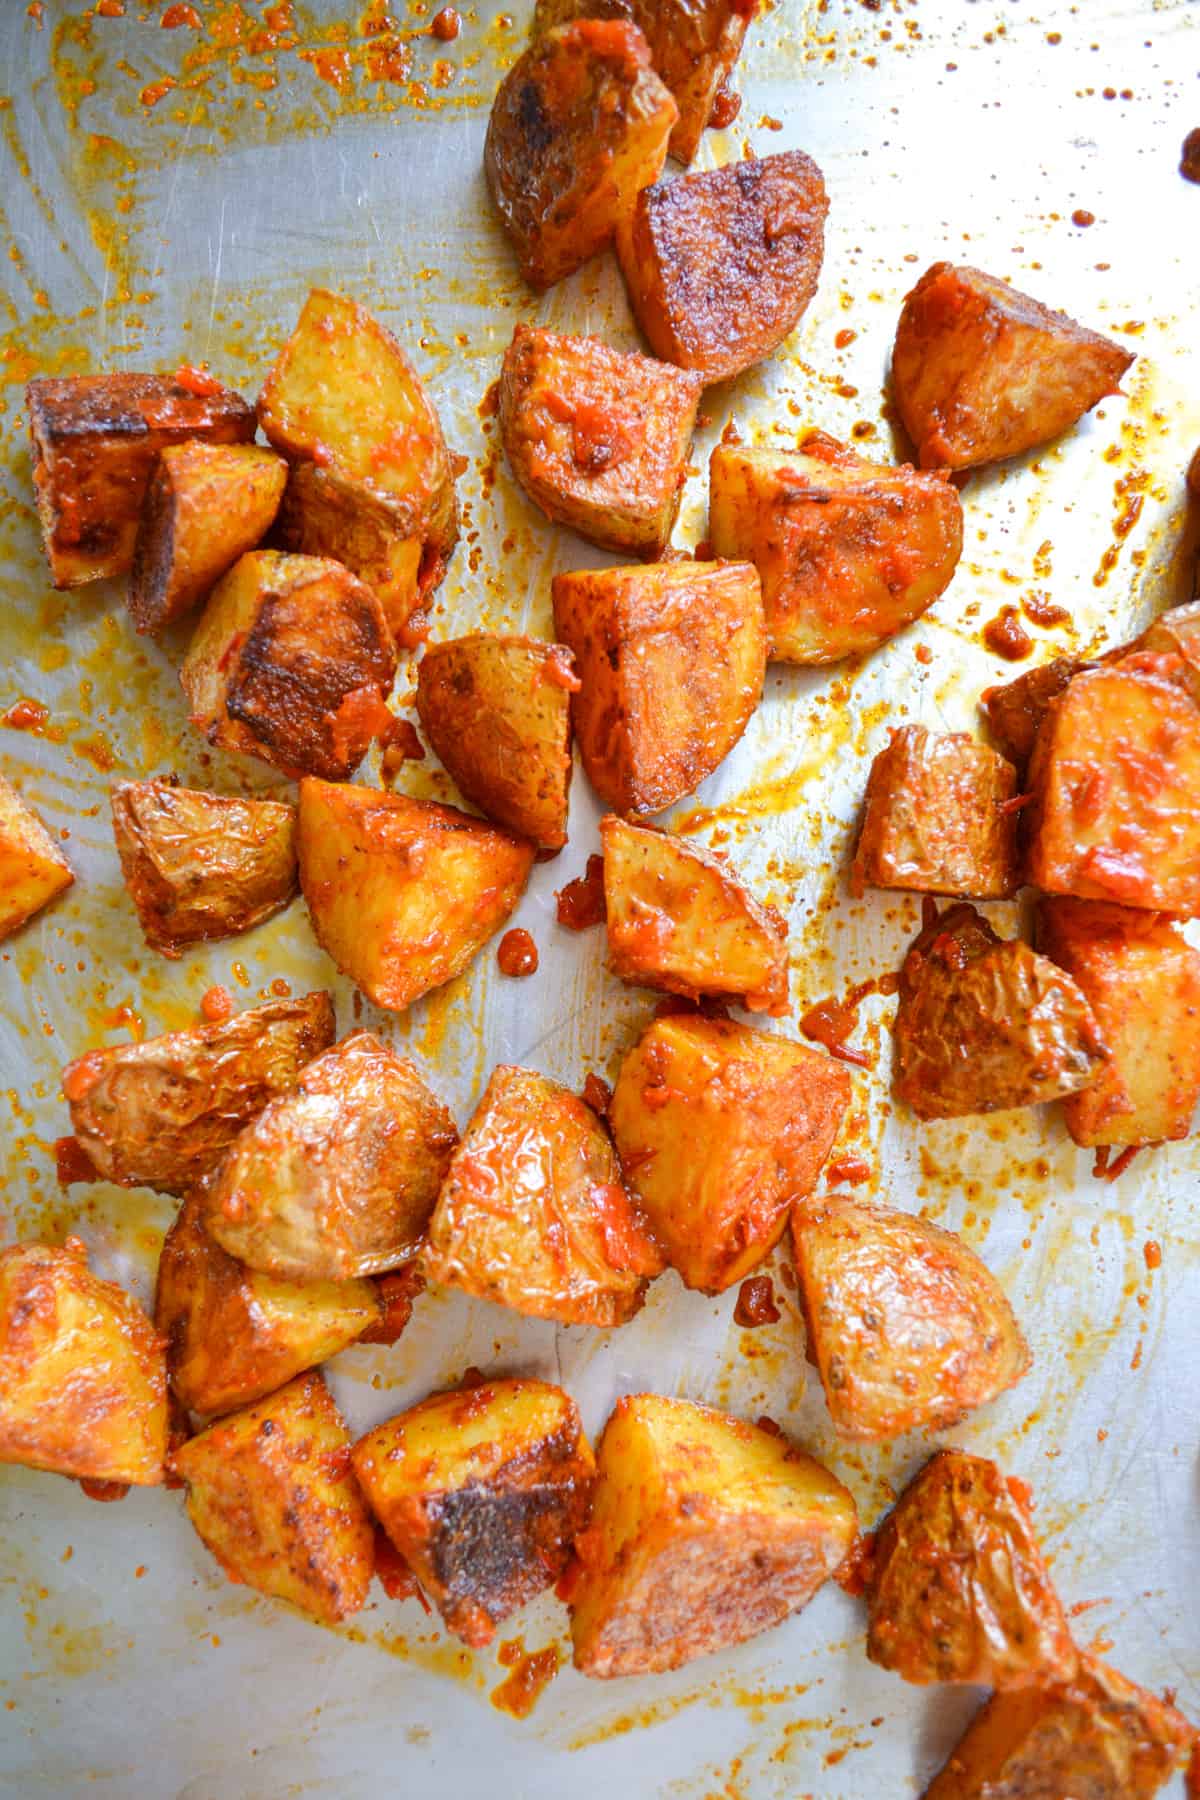 Roasted potatoes tossed with harissa sauce on a baking sheet.